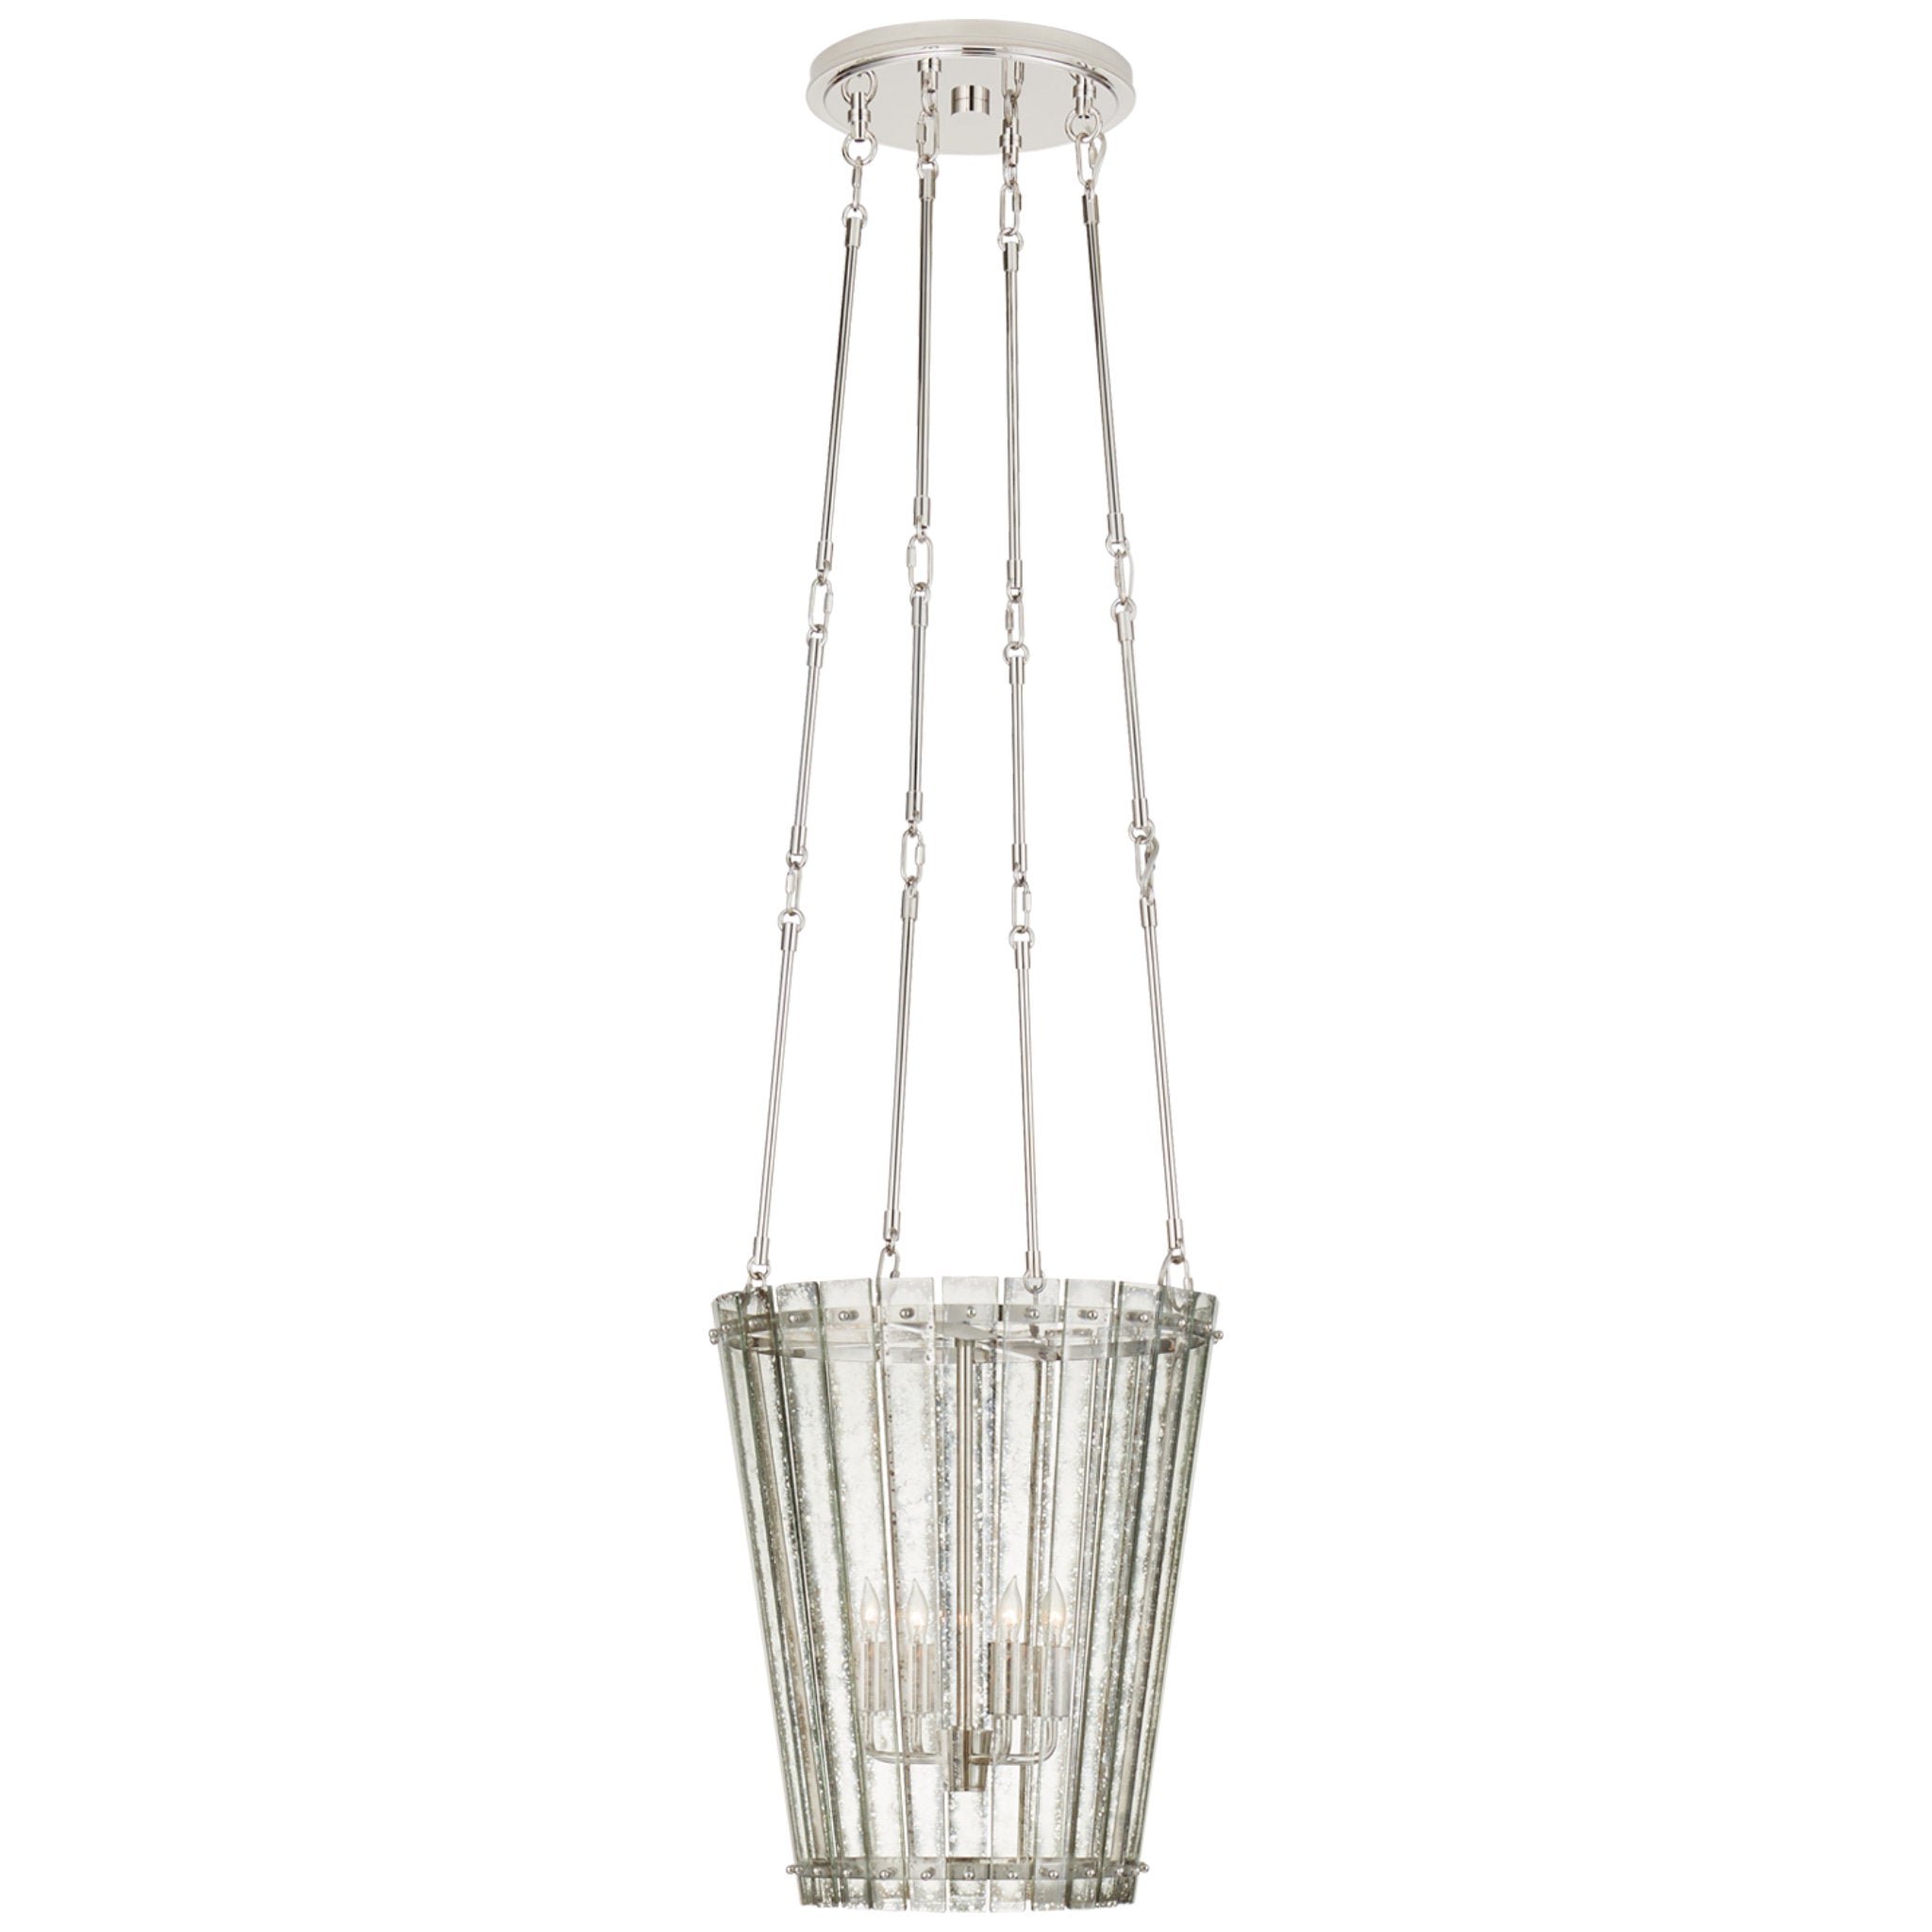 Carrier and Company Cadence Small Tall Chandelier in Polished Nickel with Antique Mirror